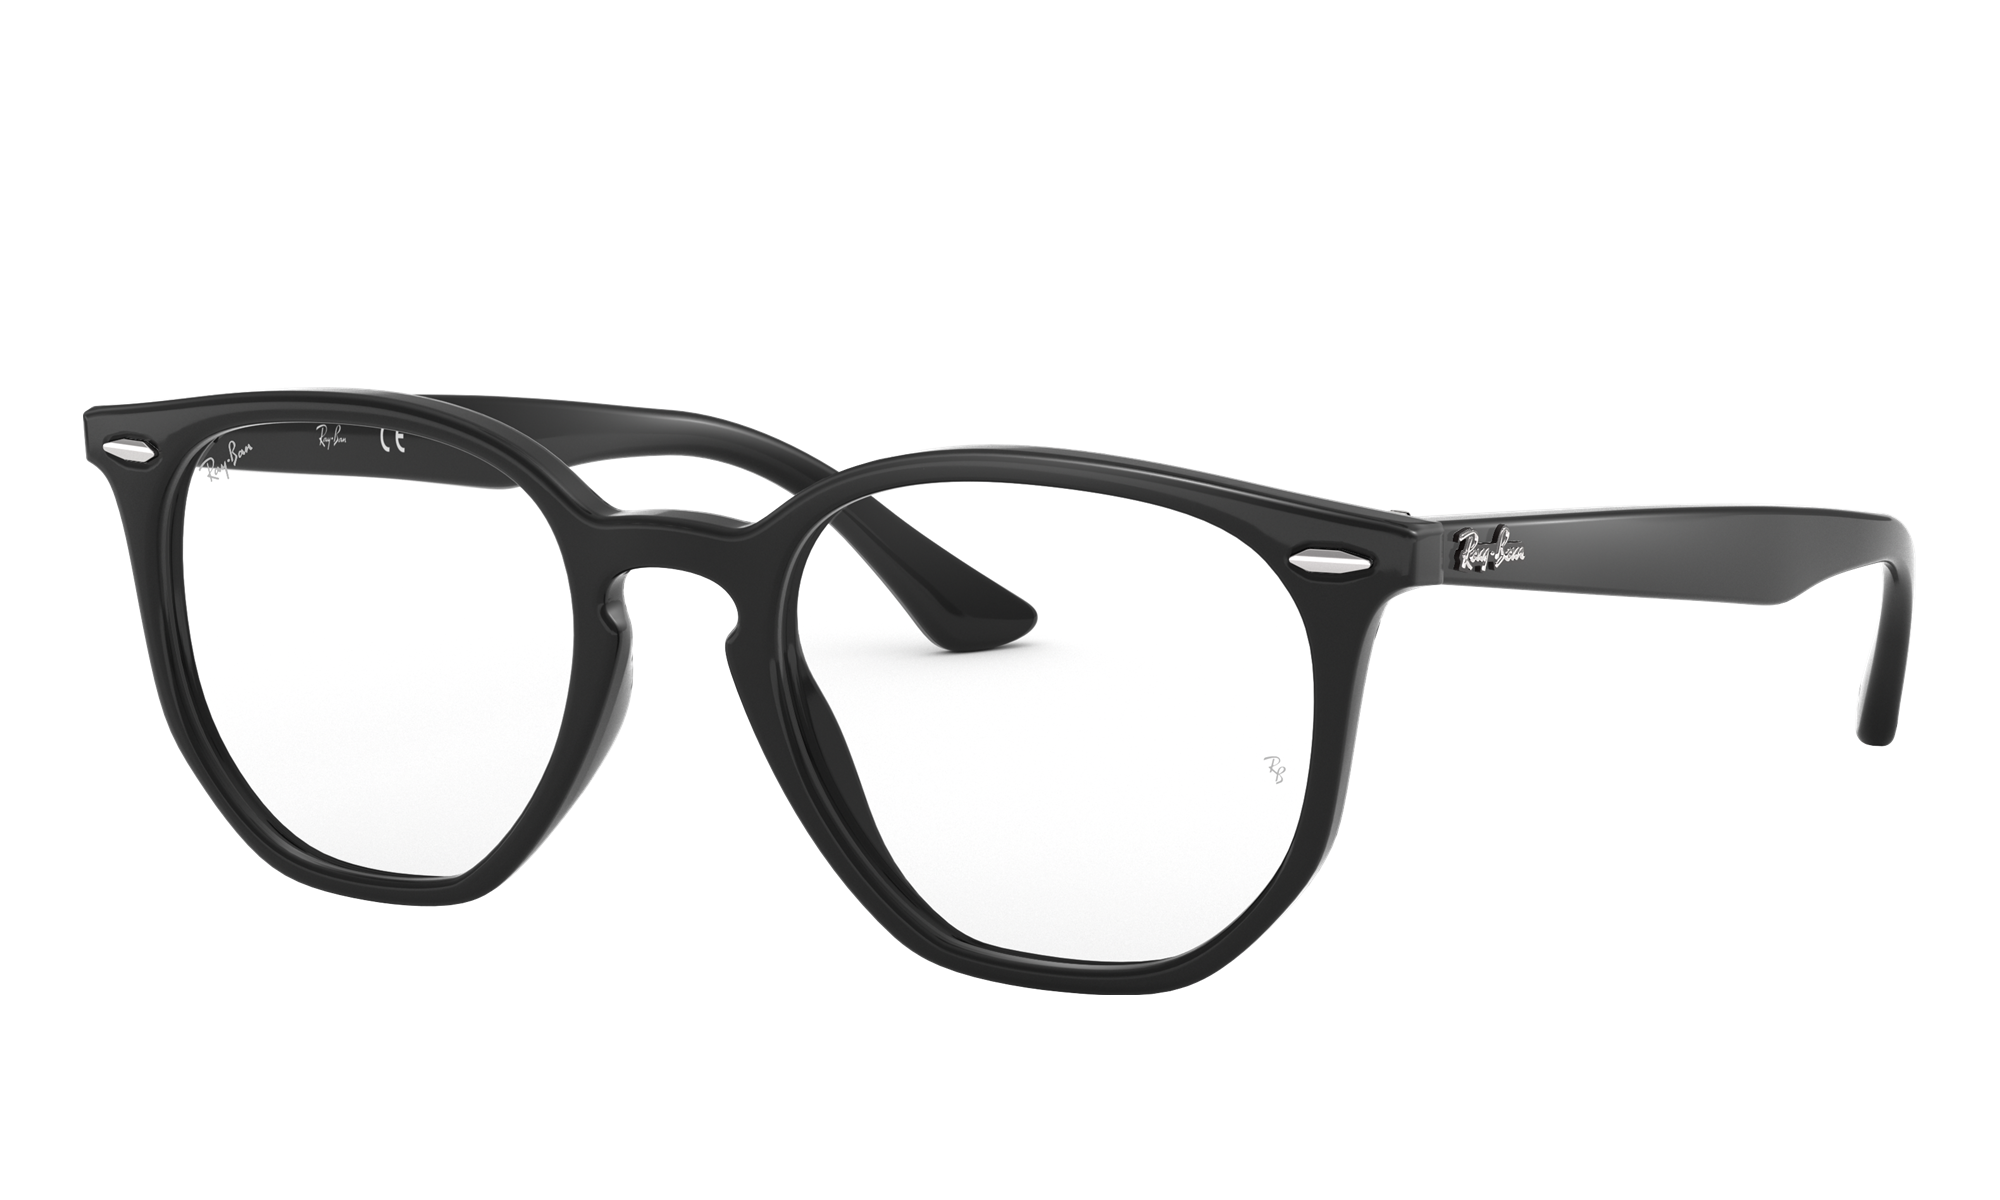 Ray-Ban Unisex Rx7151 Black Size: Small